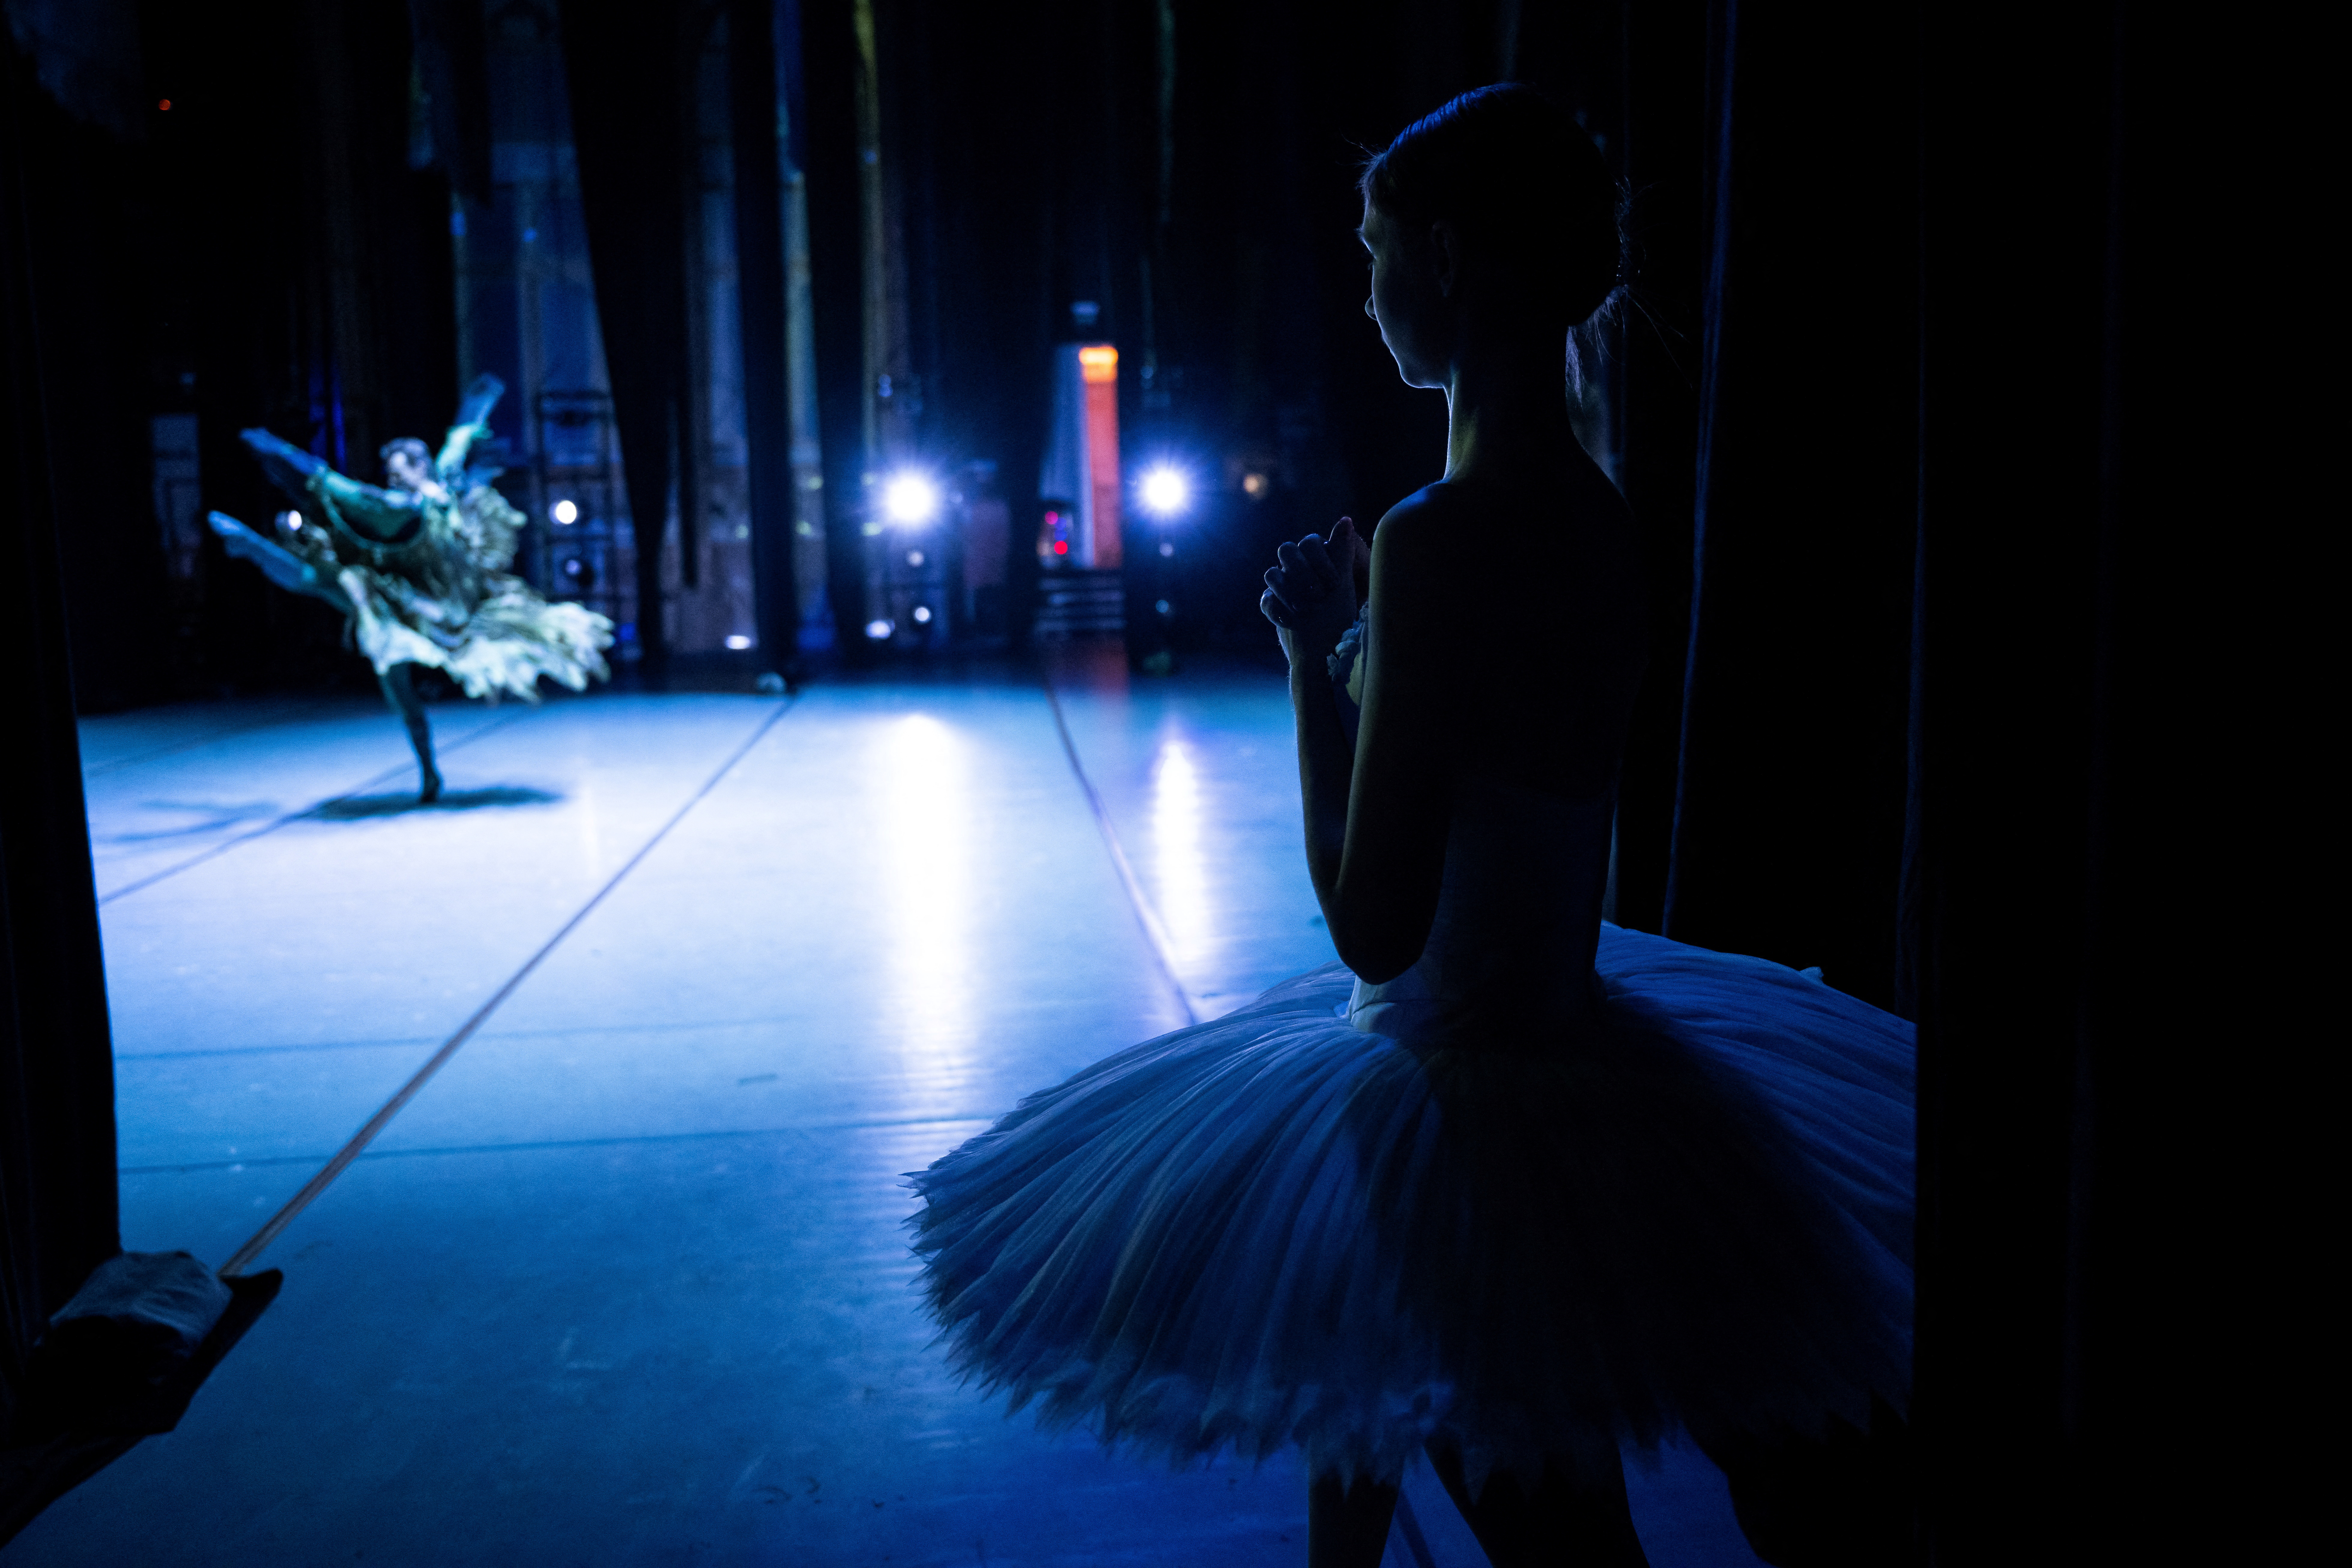 The Wider Image:  Ukrainian ballerina uprooted by war flies high again in Swan Lake